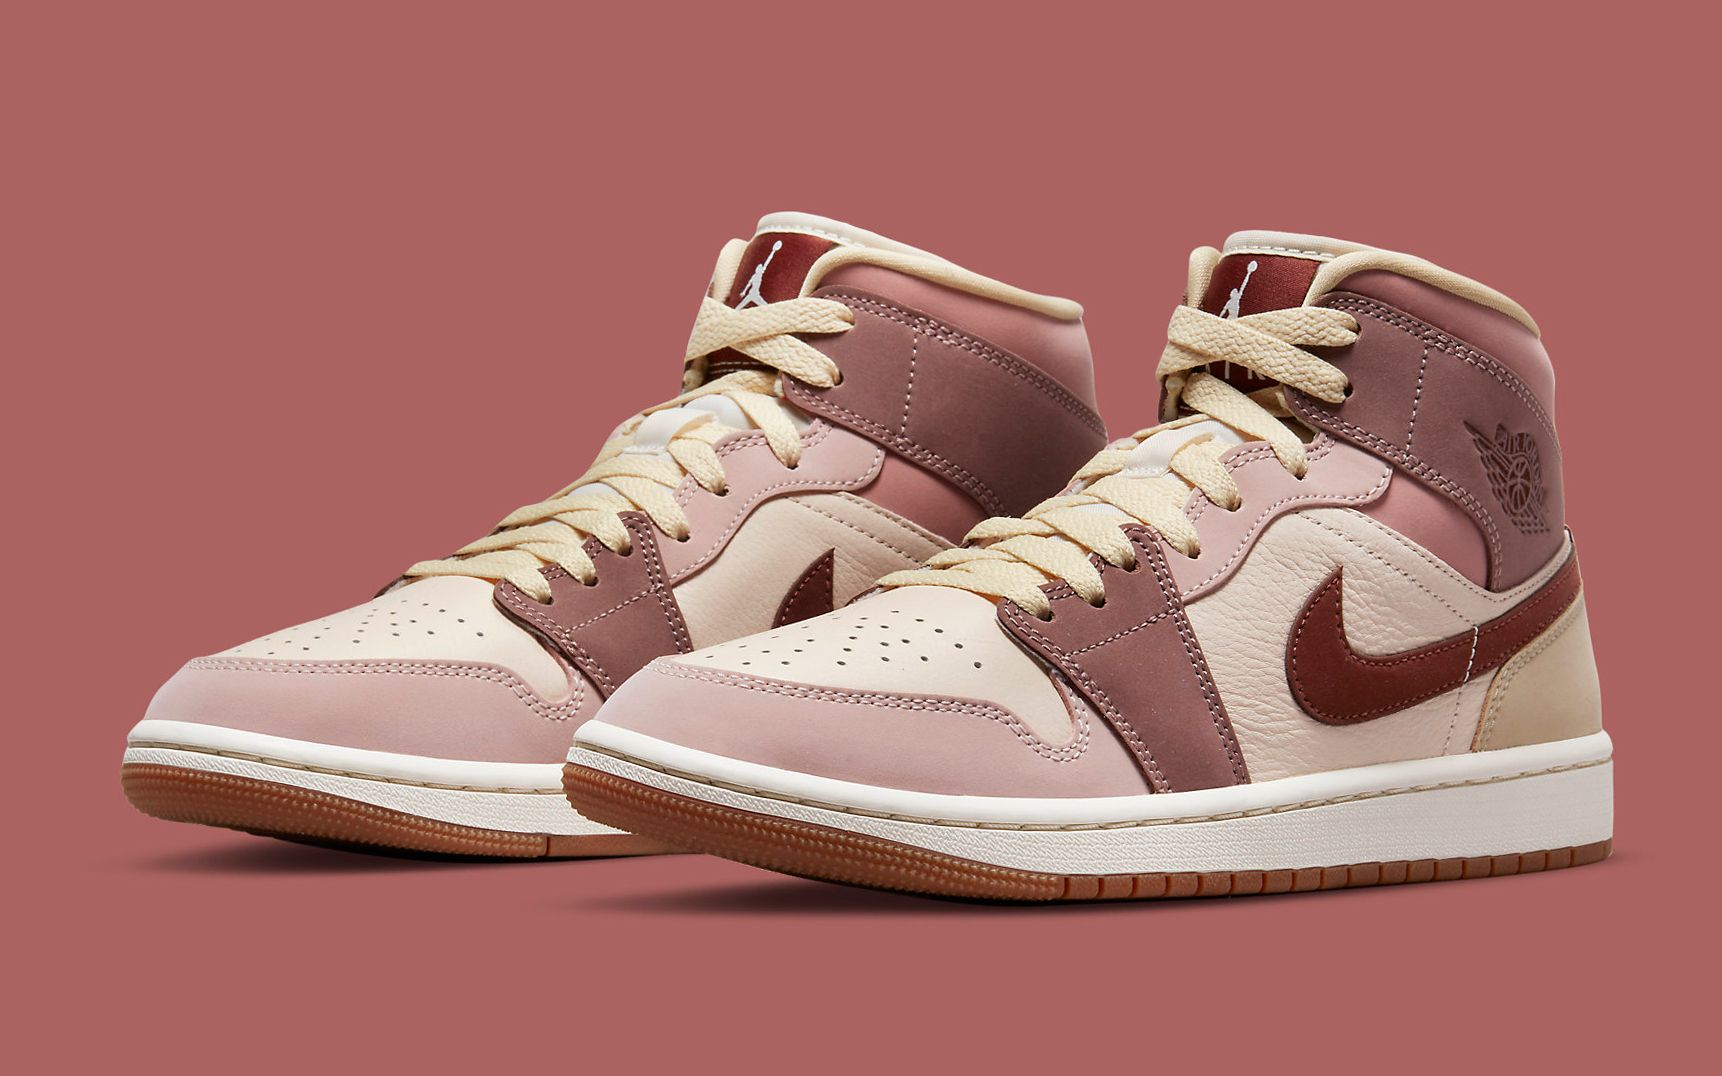 Isla de Alcatraz Economía factible This New Air Jordan 1 Mid is Fitted for Fall | HOUSE OF HEAT